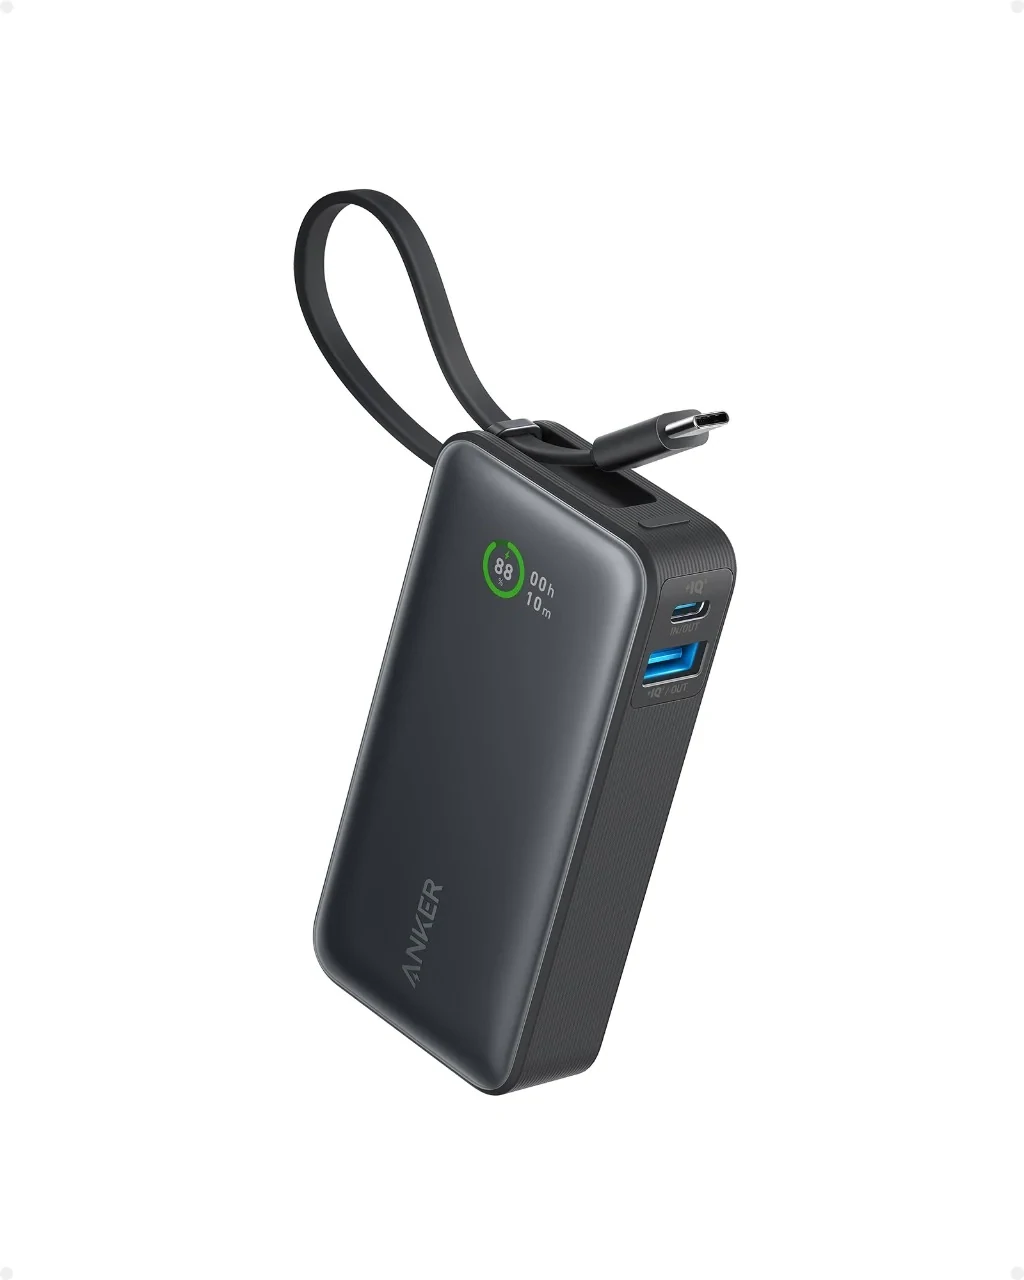 Anker 533 10000mAh 30w Nano Power Bank With Built-In USB-C Cable - Black